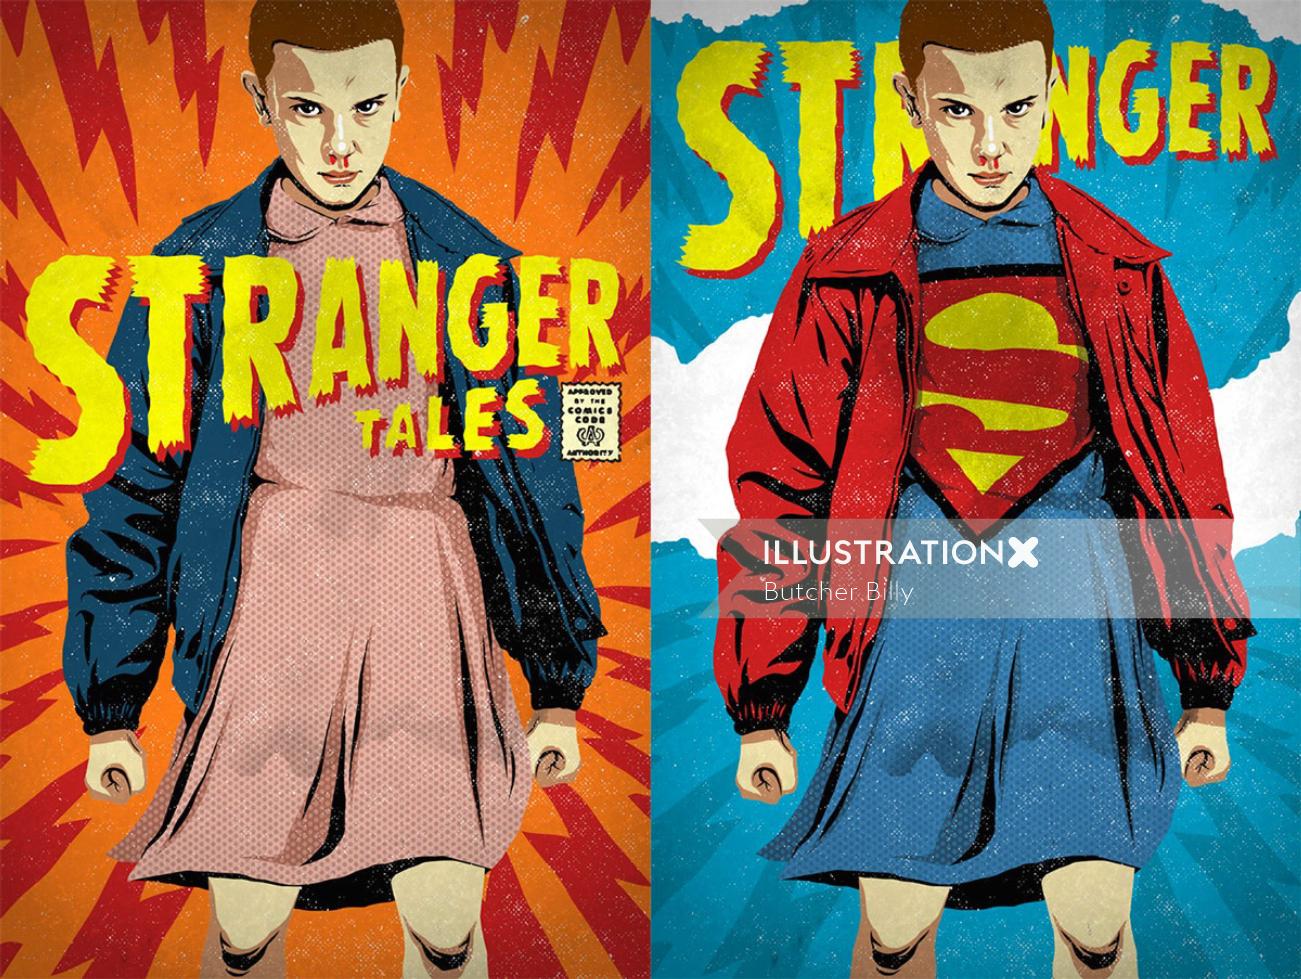 Stranger Things series with the Superman logo illustration